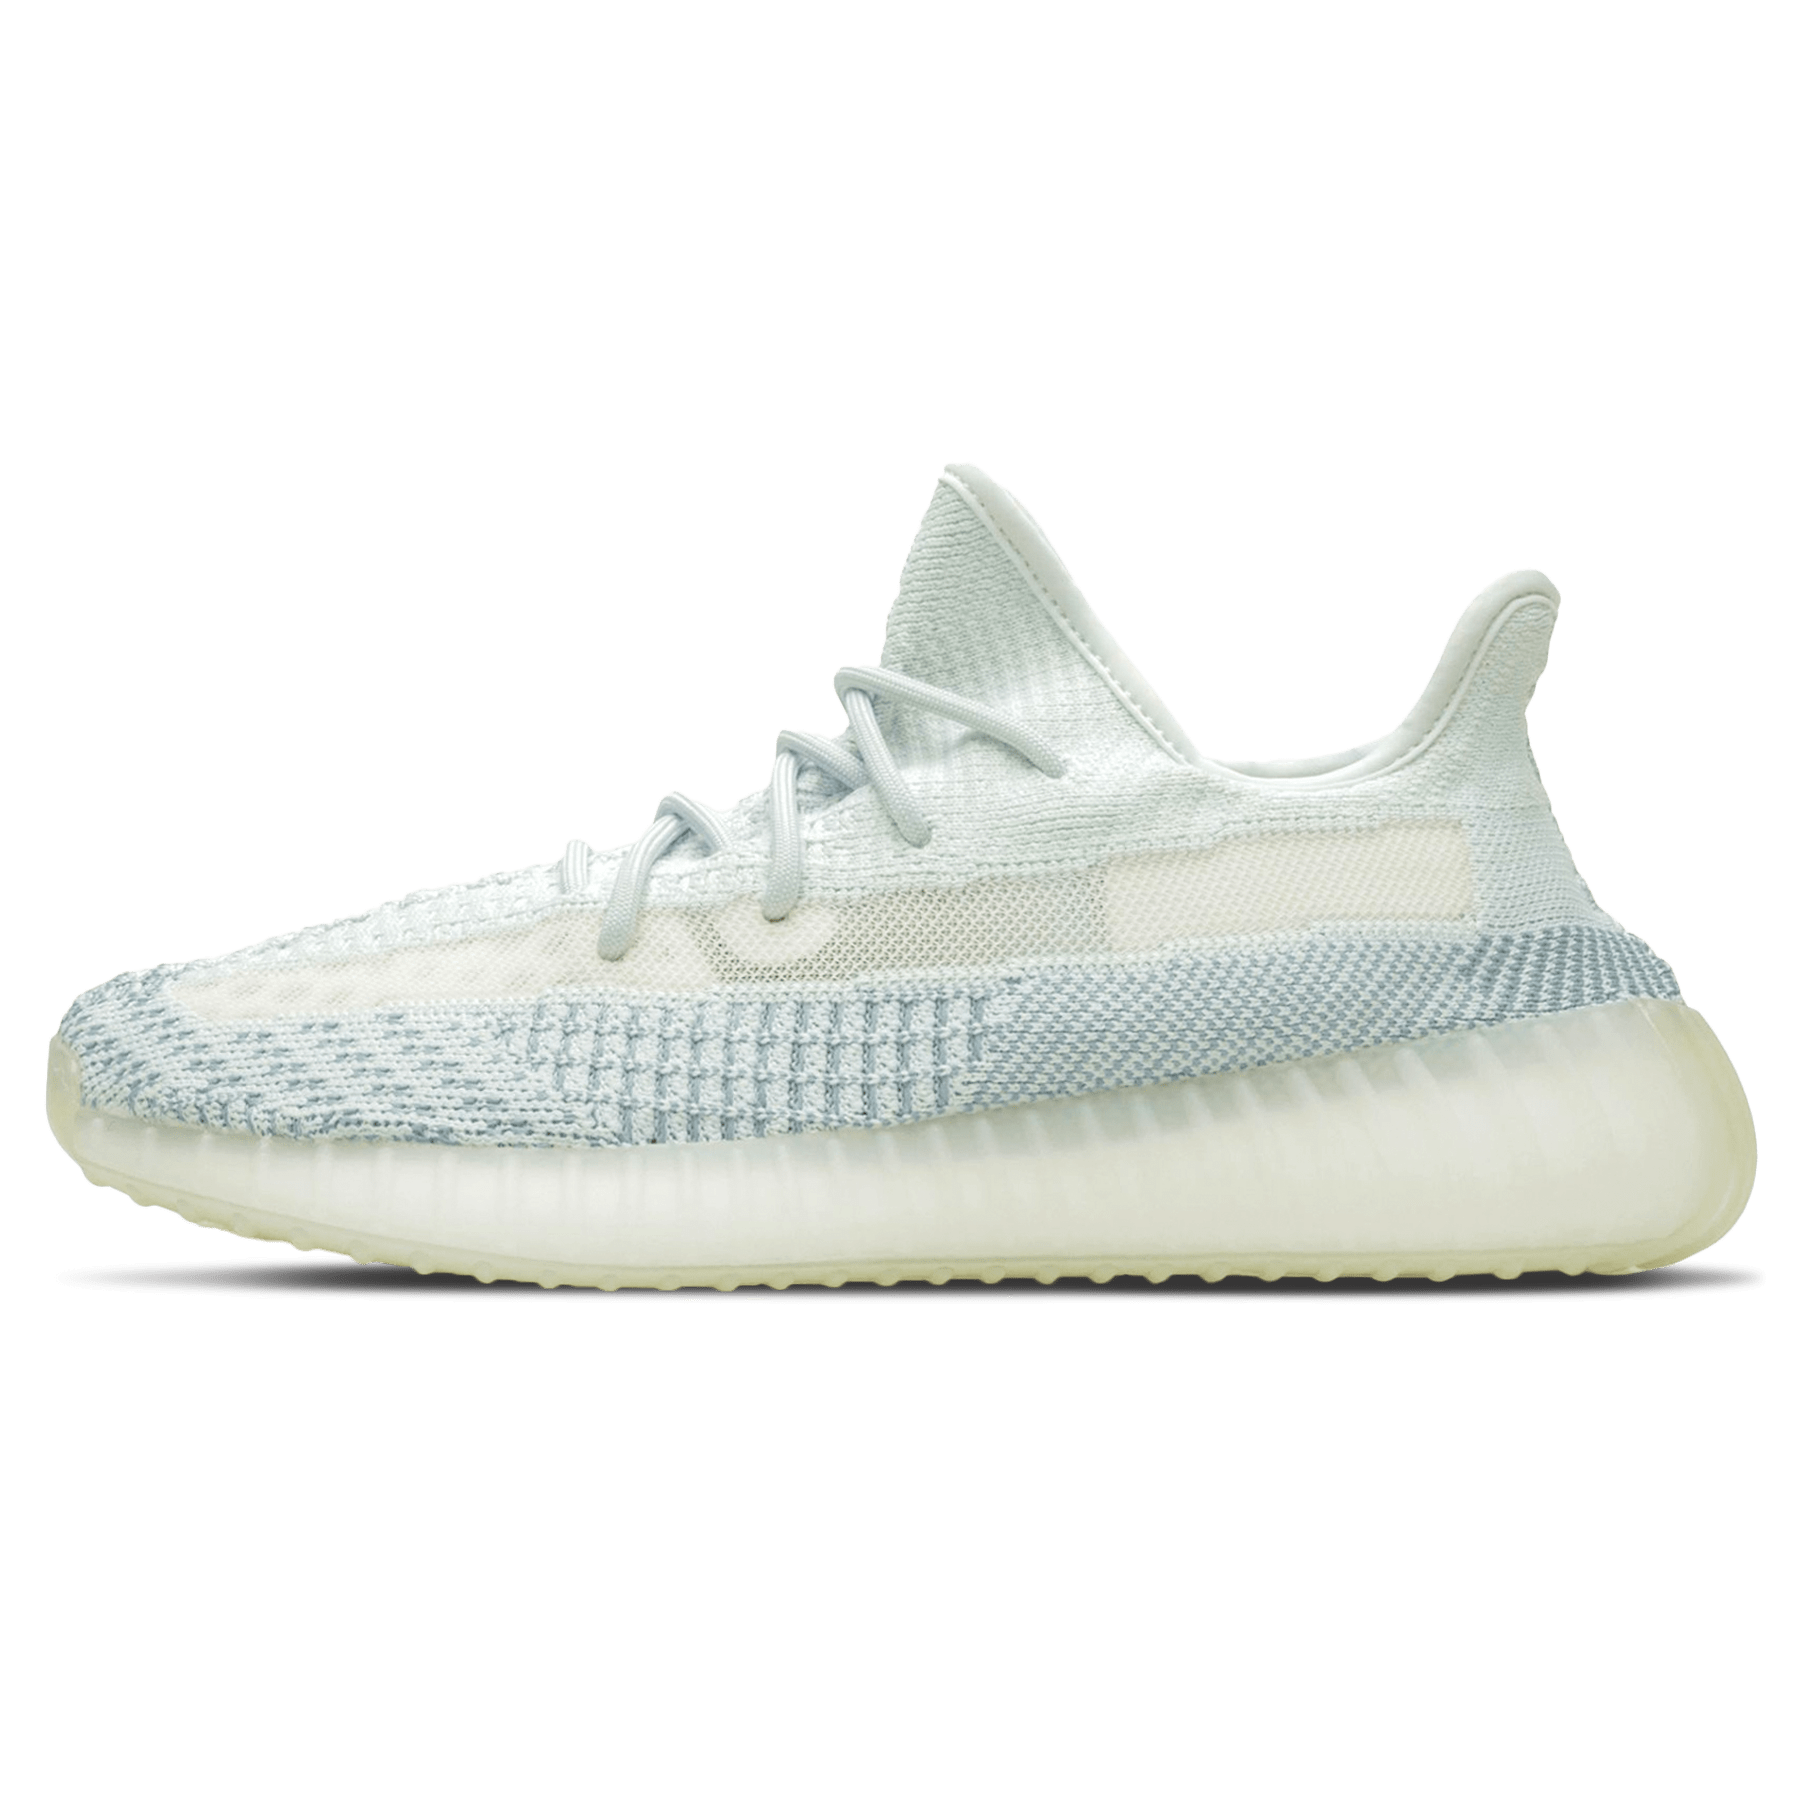 Yeezy Boost 350 V2 Cloud White Reflective FW5317